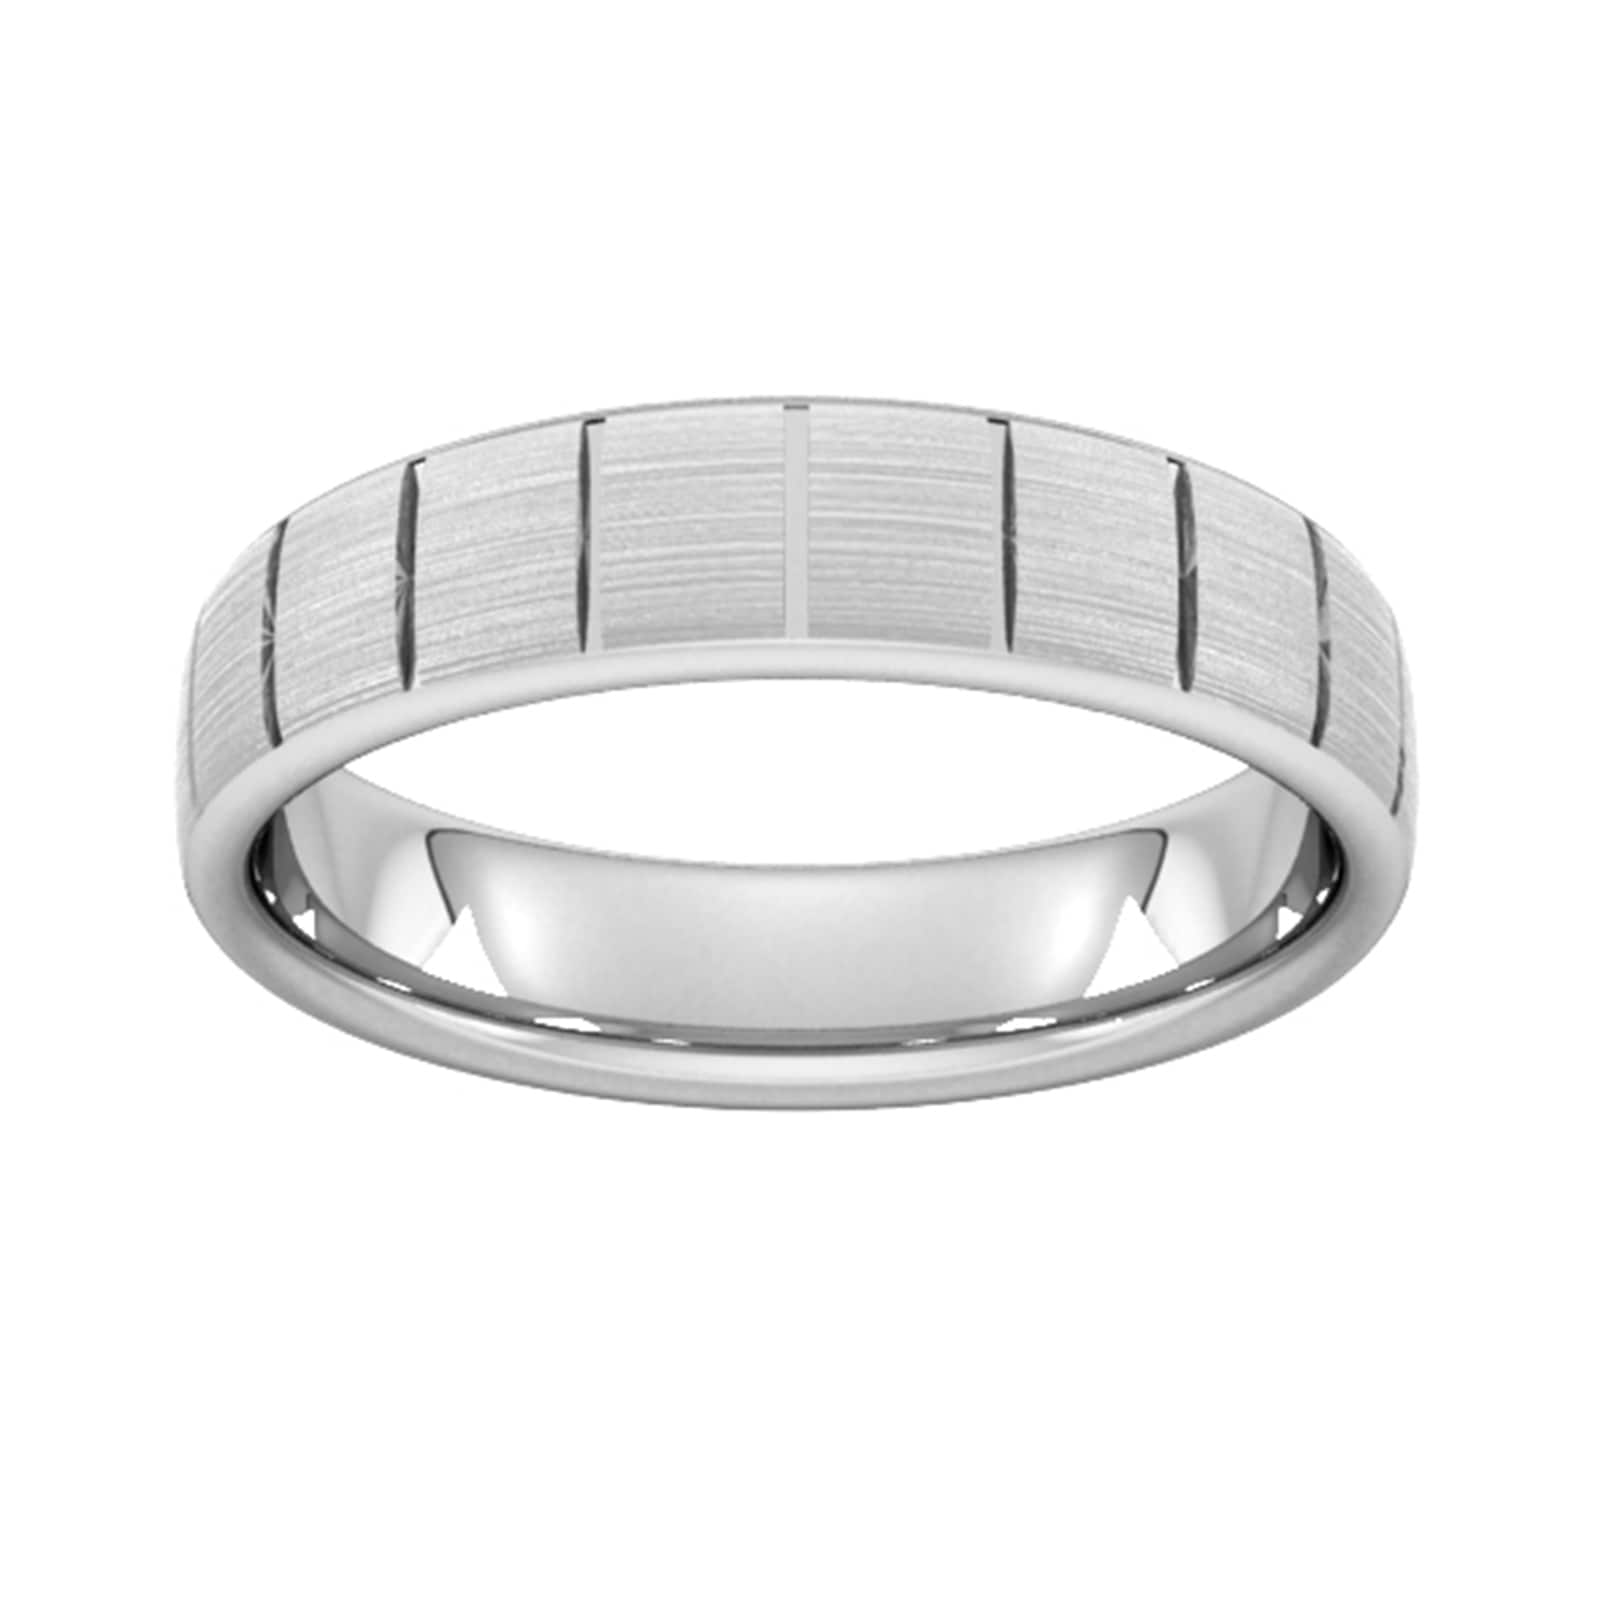 5mm D Shape Standard Vertical Lines Wedding Ring In 9 Carat White Gold - Ring Size I